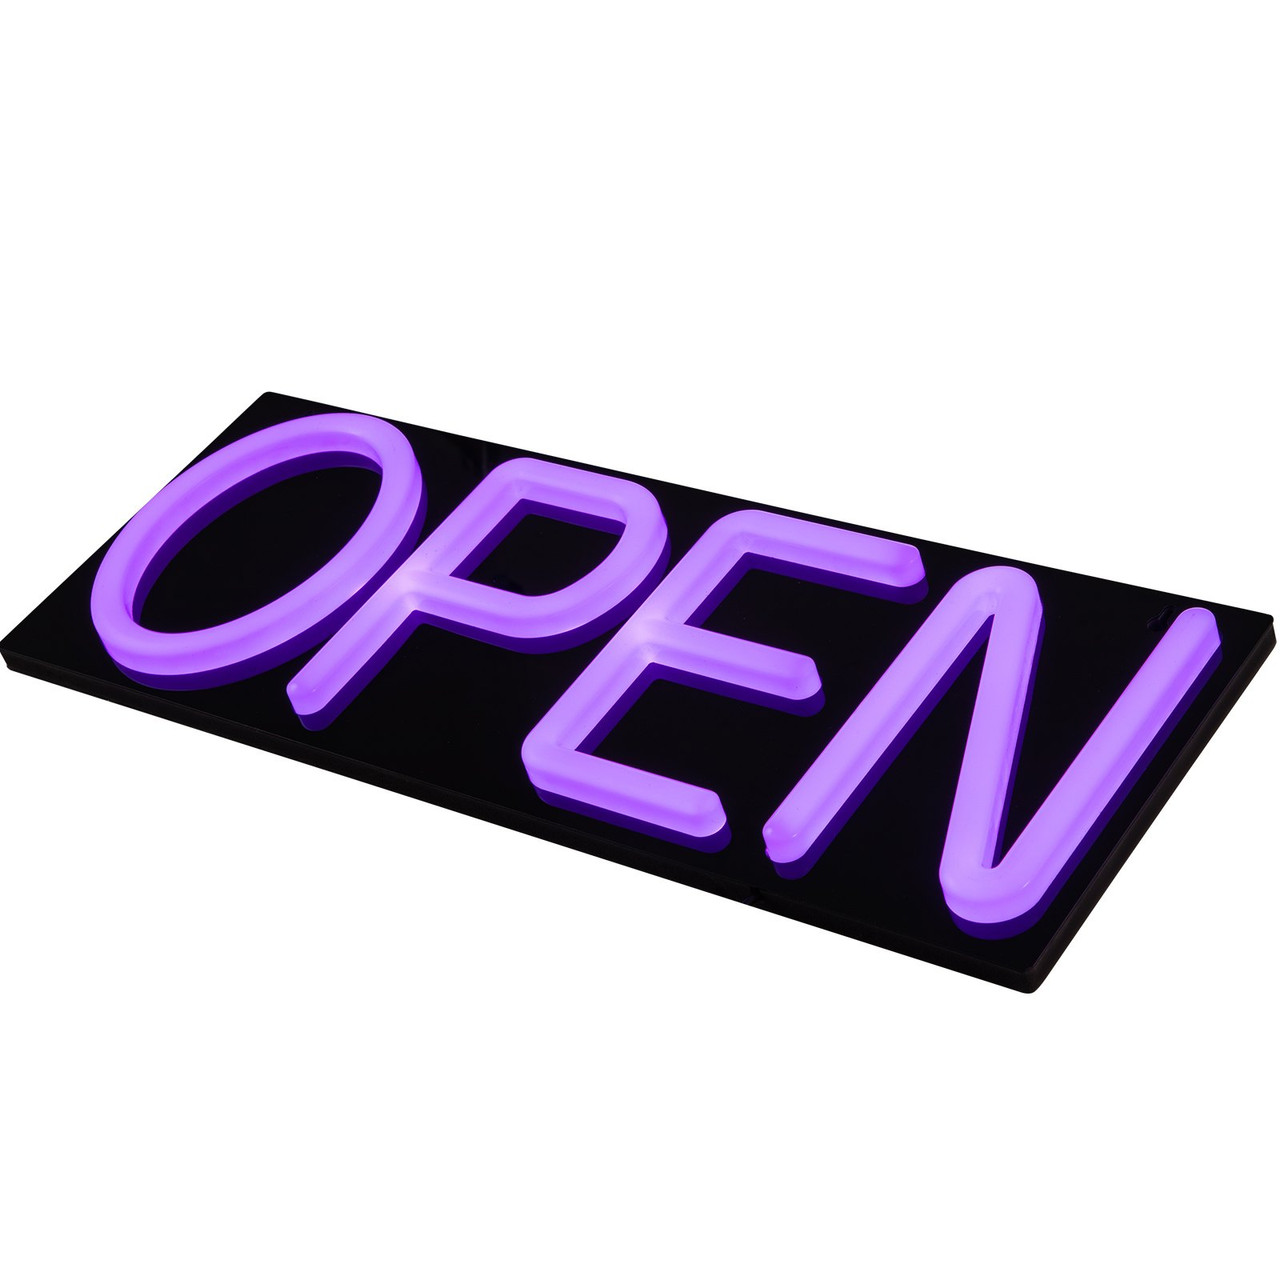 LED Open Sign, 22" x 20" Neon Open Sign for Business, Multiple Flashing and Color Modes Neon Lights Signs with Remote Control and Power Adapter, for Restaurant, Shop, Hotel, Window, Wall